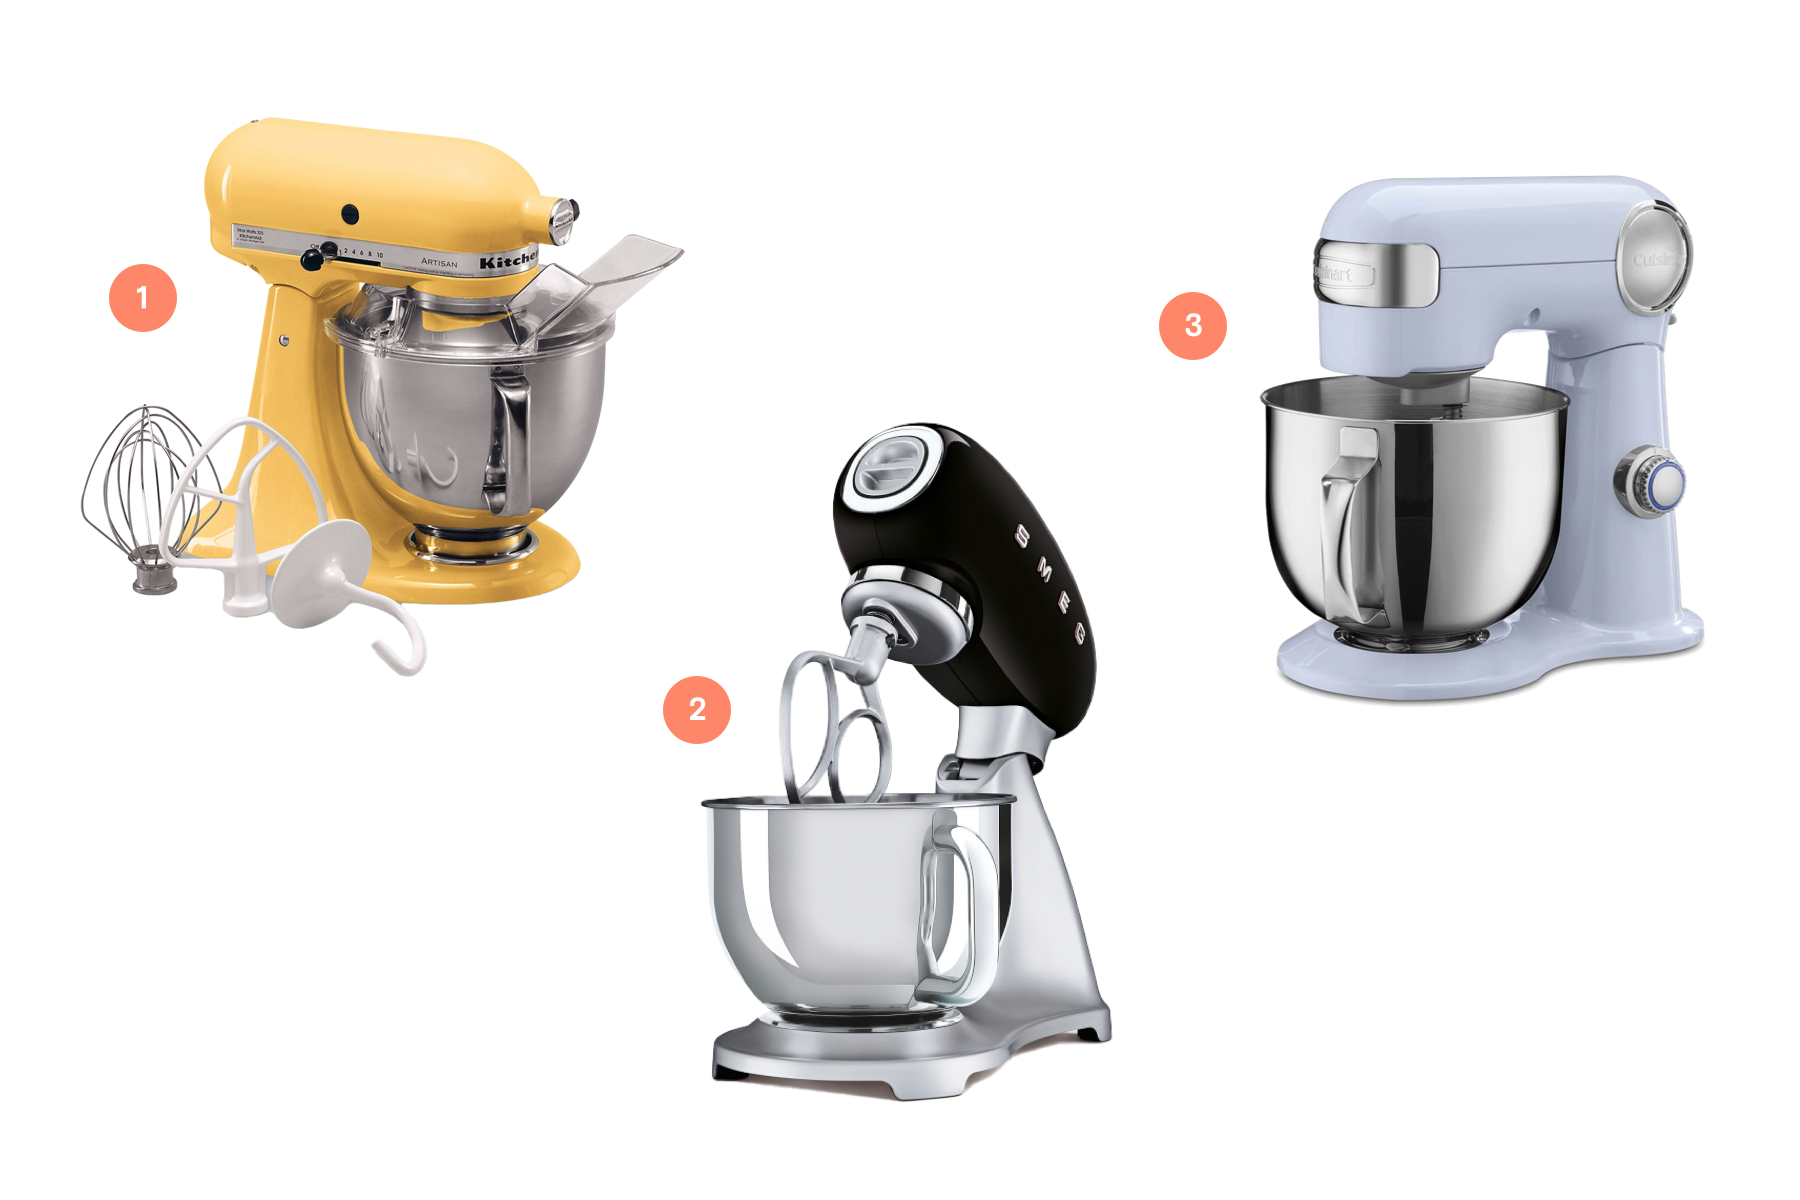 Three standing mixer options, as recommended by the article.